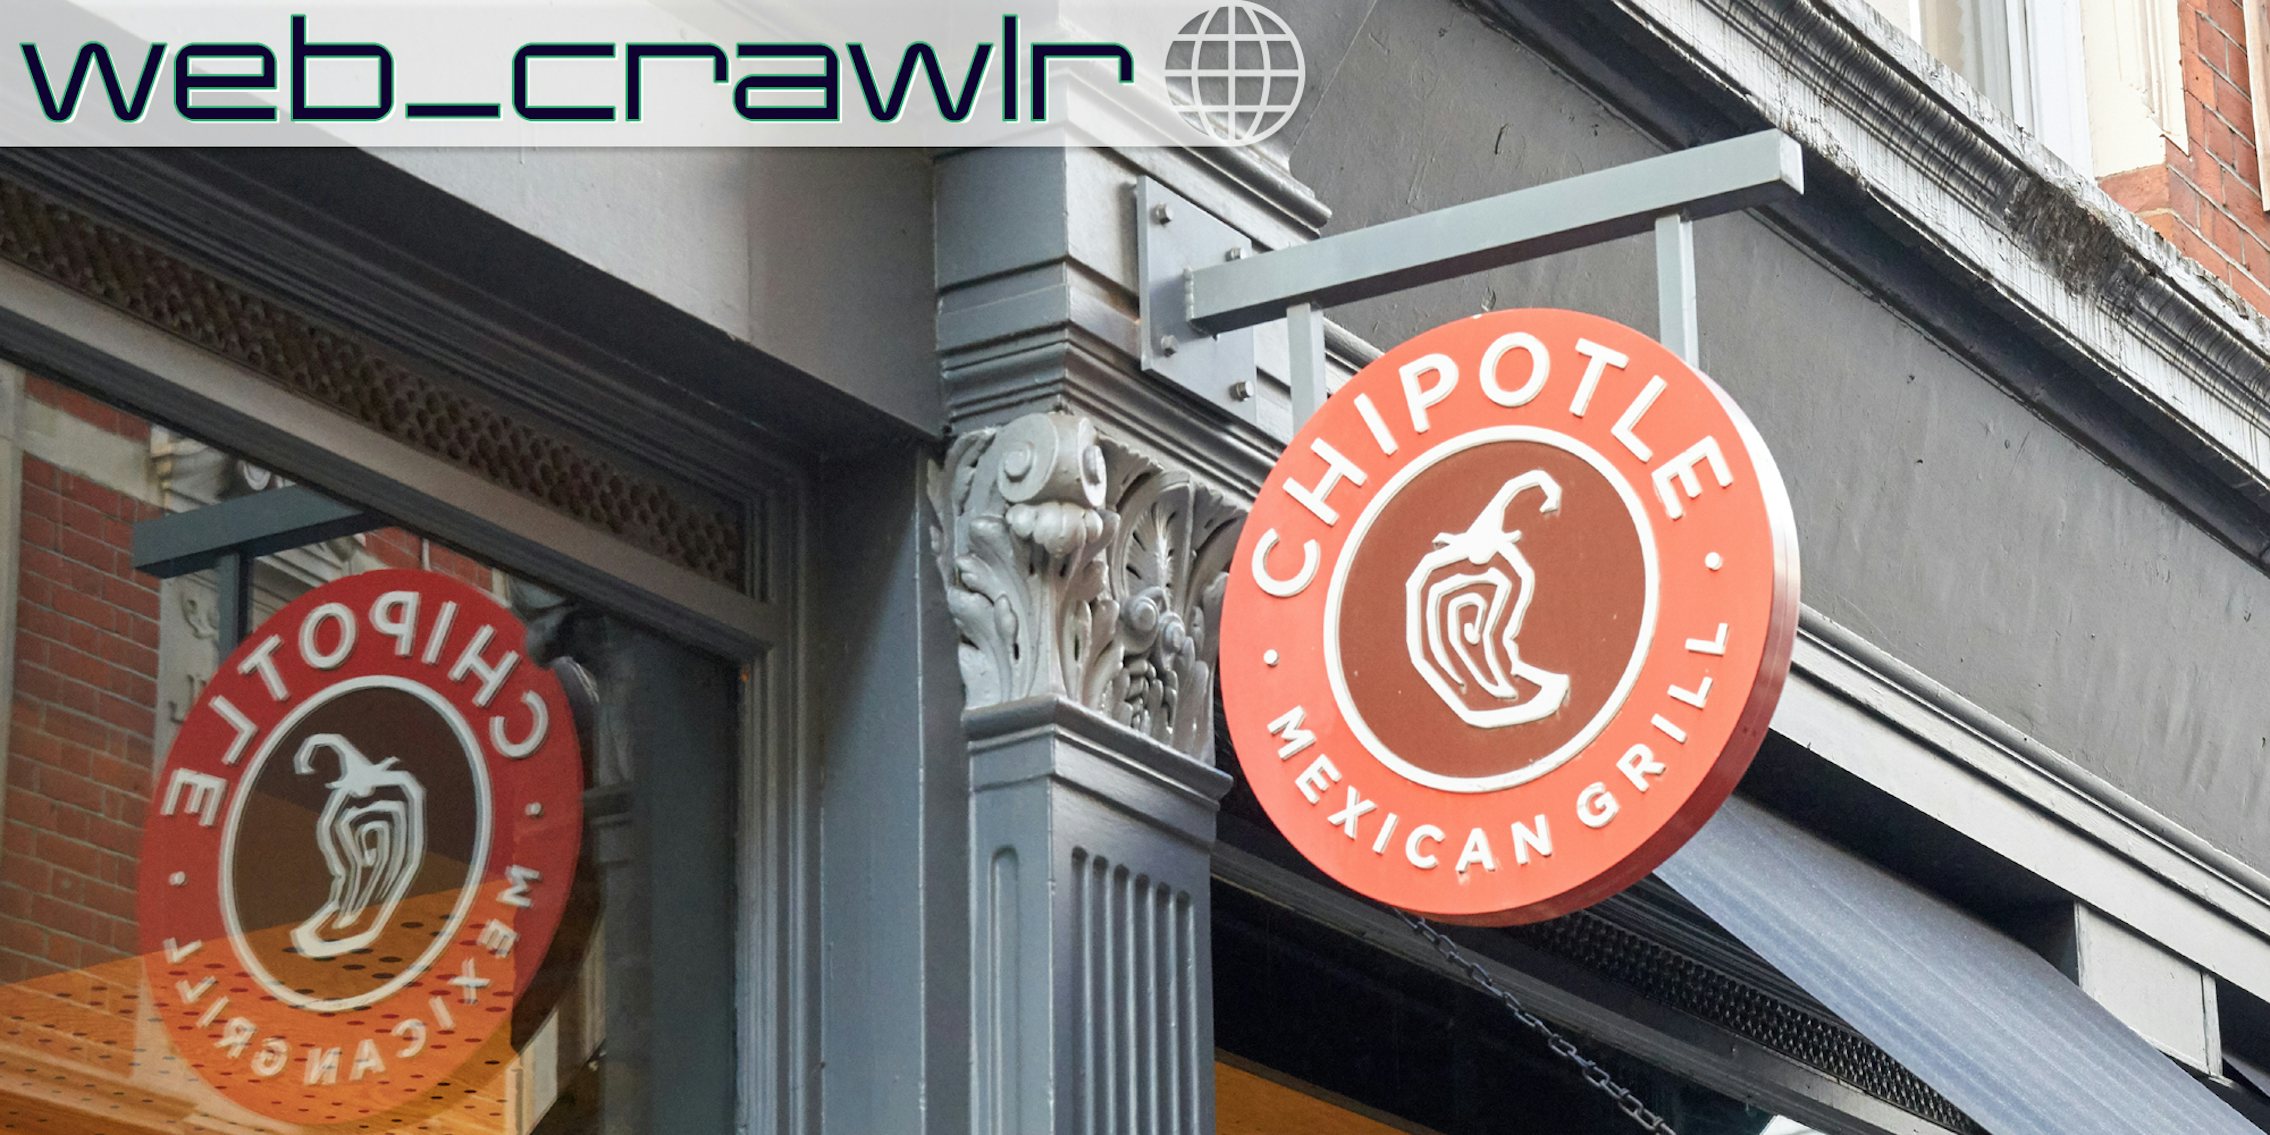 A Chipotle Mexican Grill sign. The Daily Dot newsletter web_crawlr logo is in the top left corner.